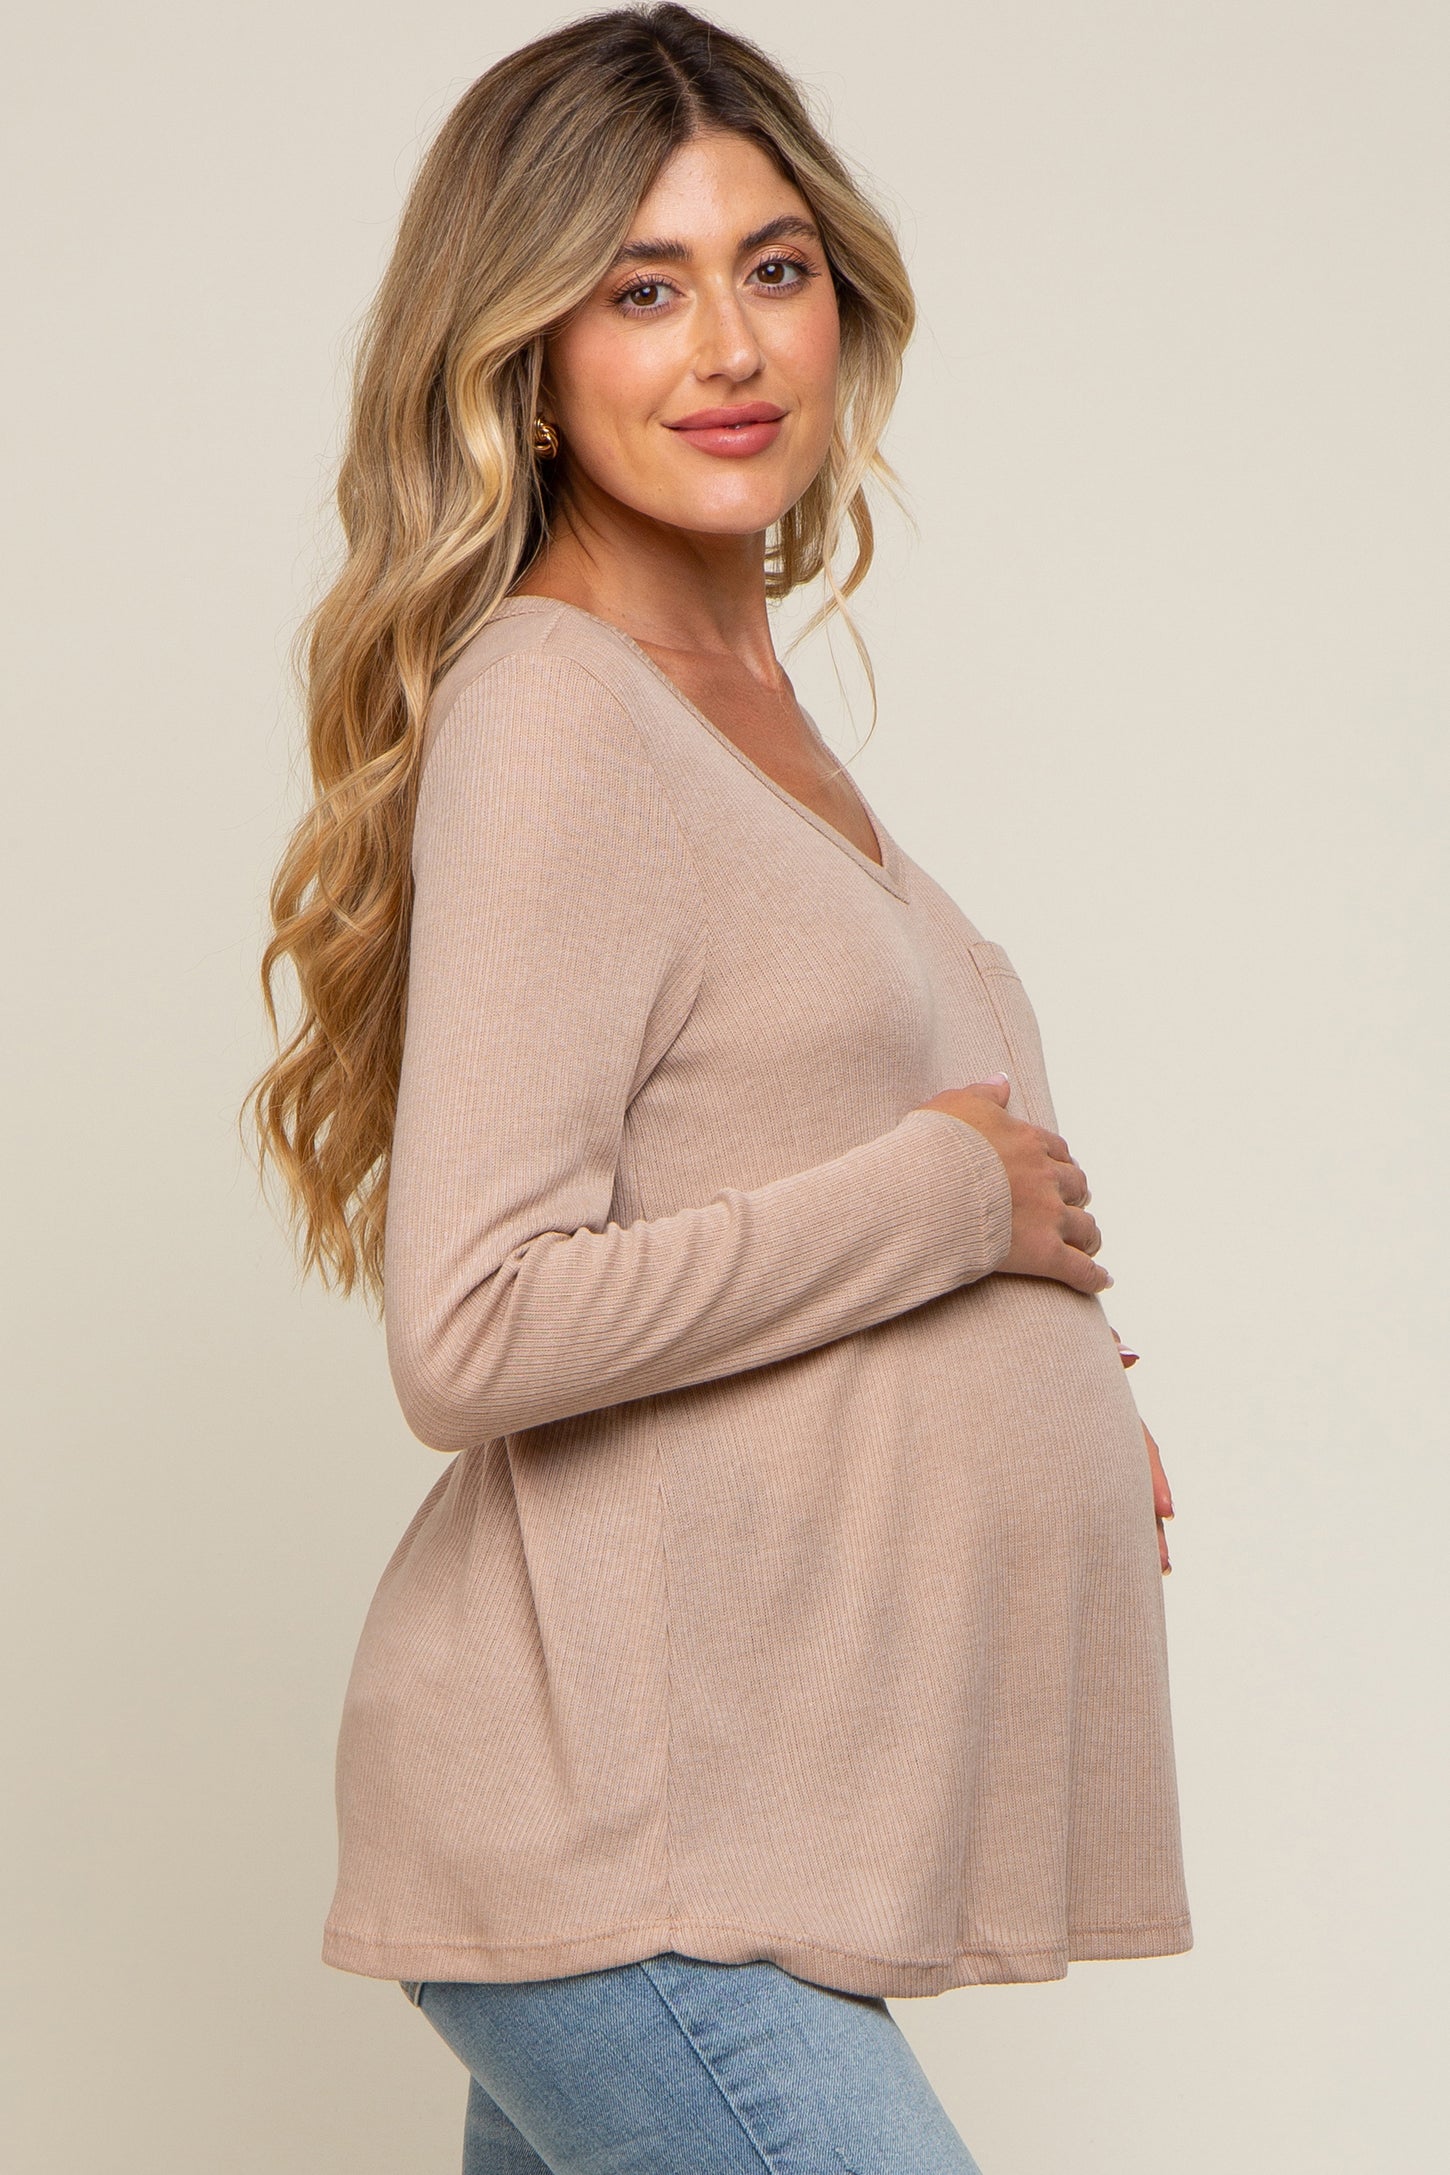 Beige Ribbed Knit Maternity Long Sleeve Top